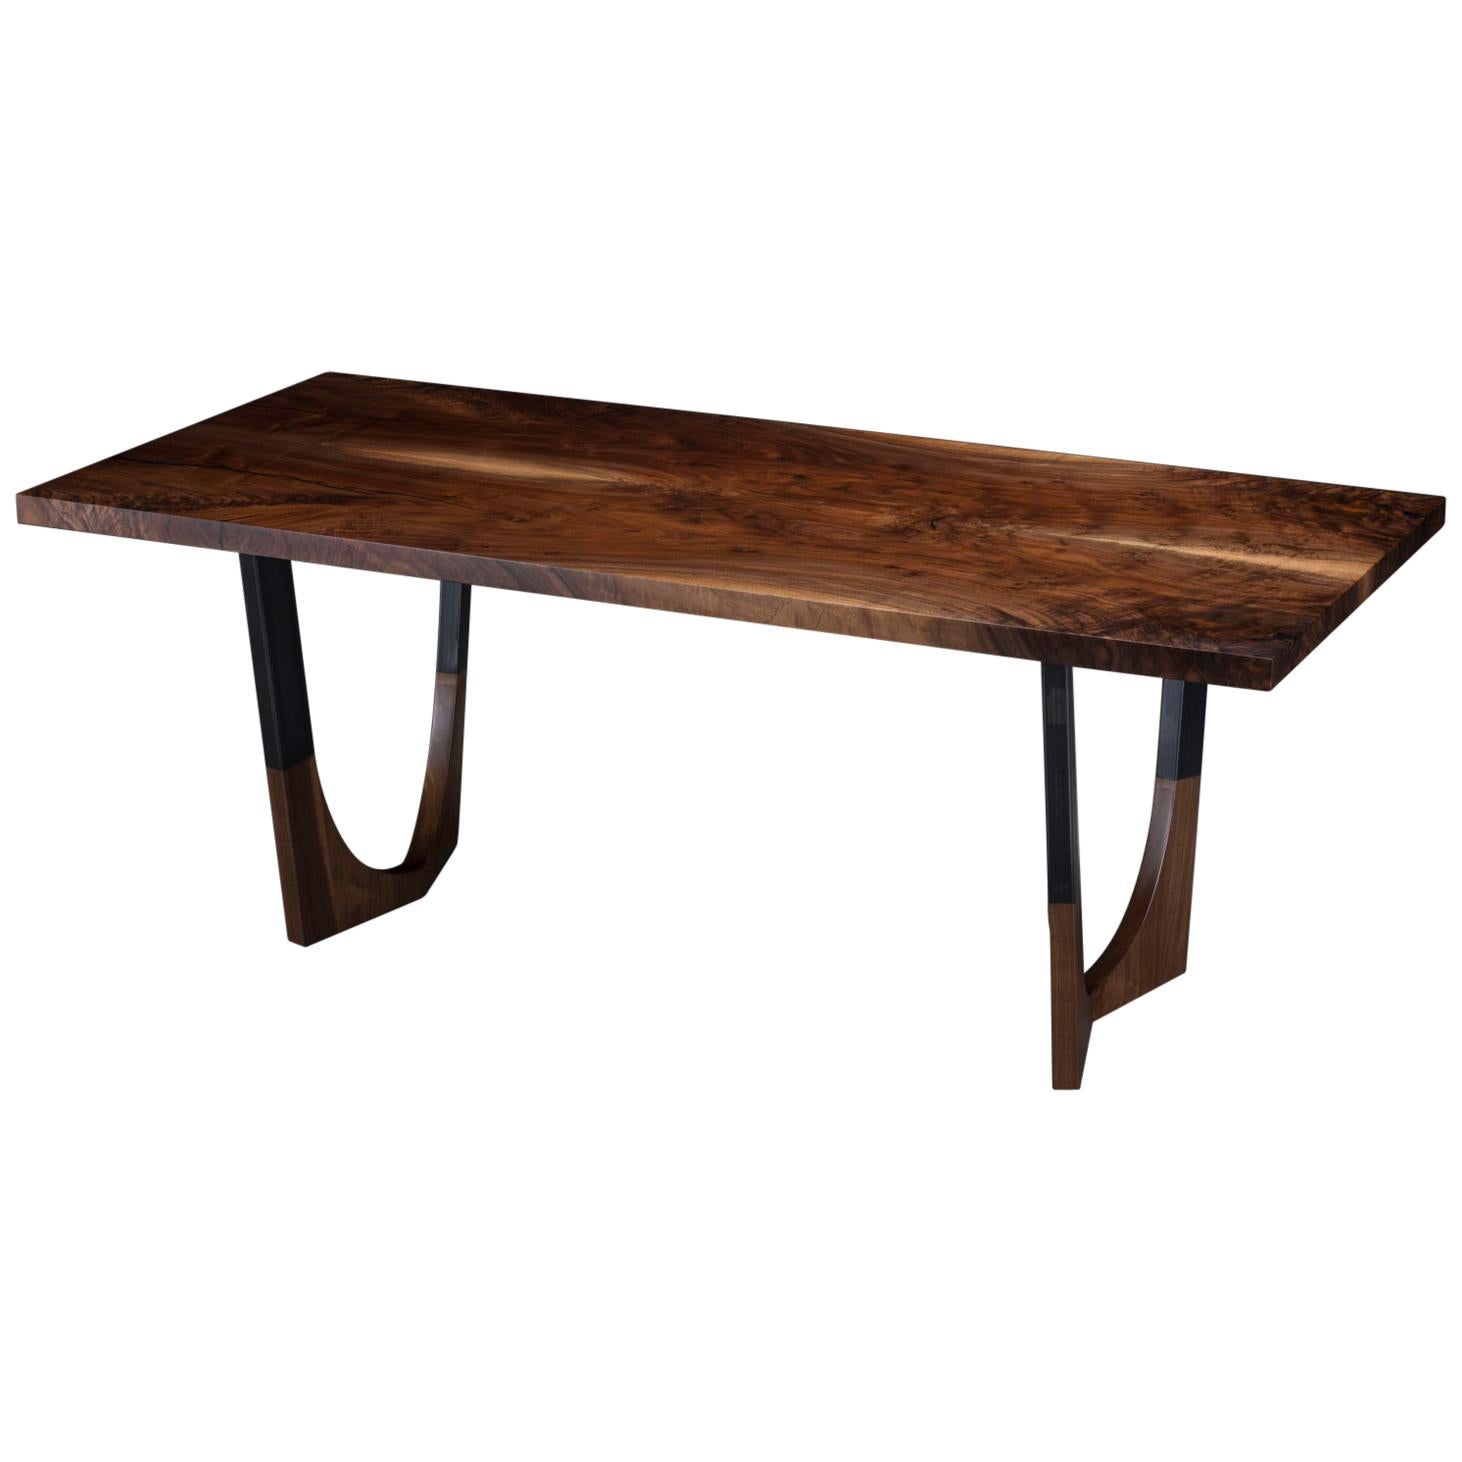 Bookmatched Walnut Dining Table with Black Steel Legs "Lafayette Dining Table"